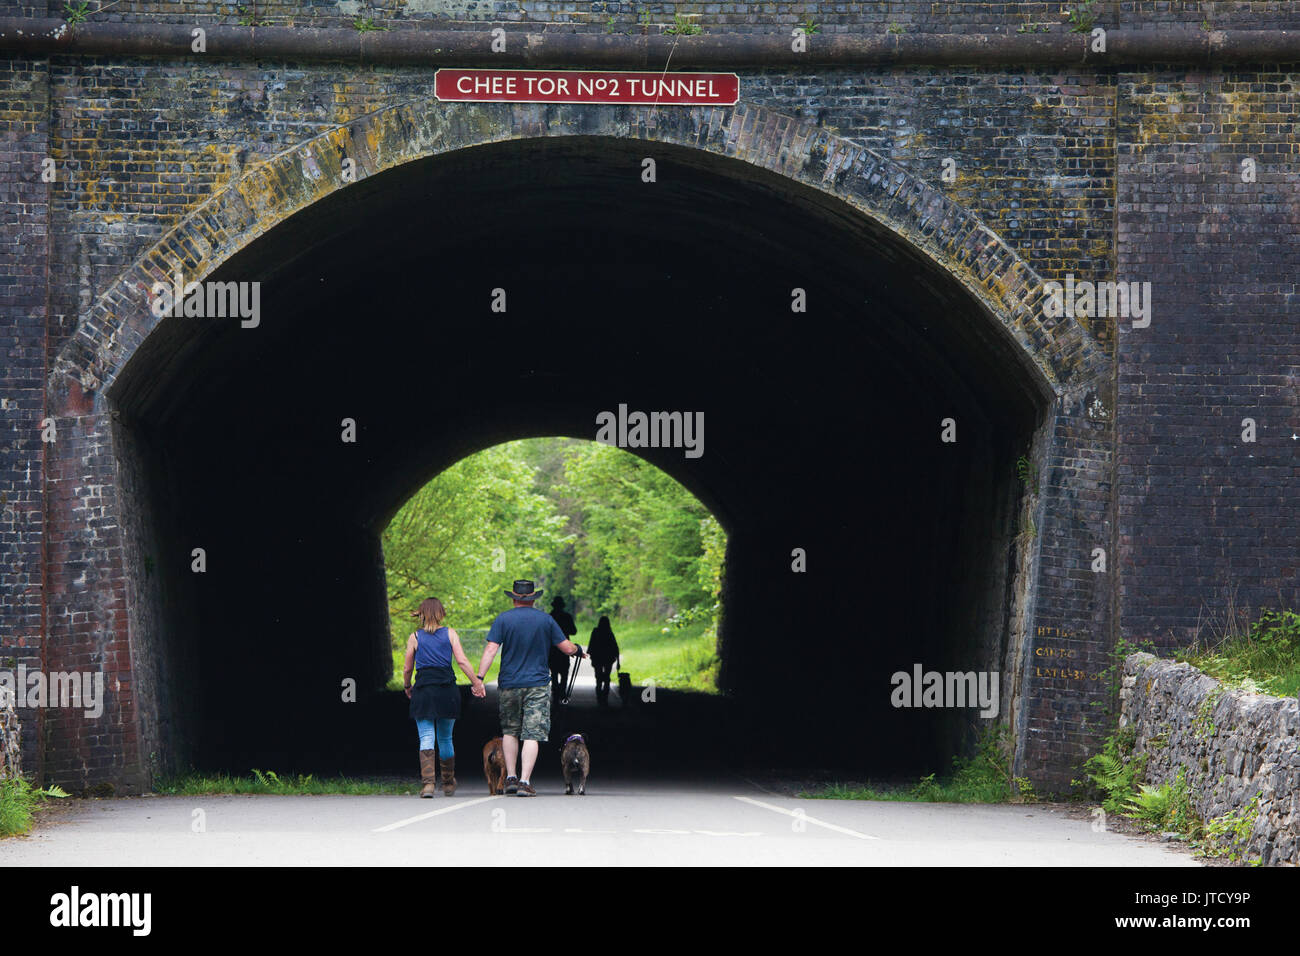 Chee Tor Tunnel No 2, Monsal Trail, cyclist and walkers route, Peak District Stock Photo